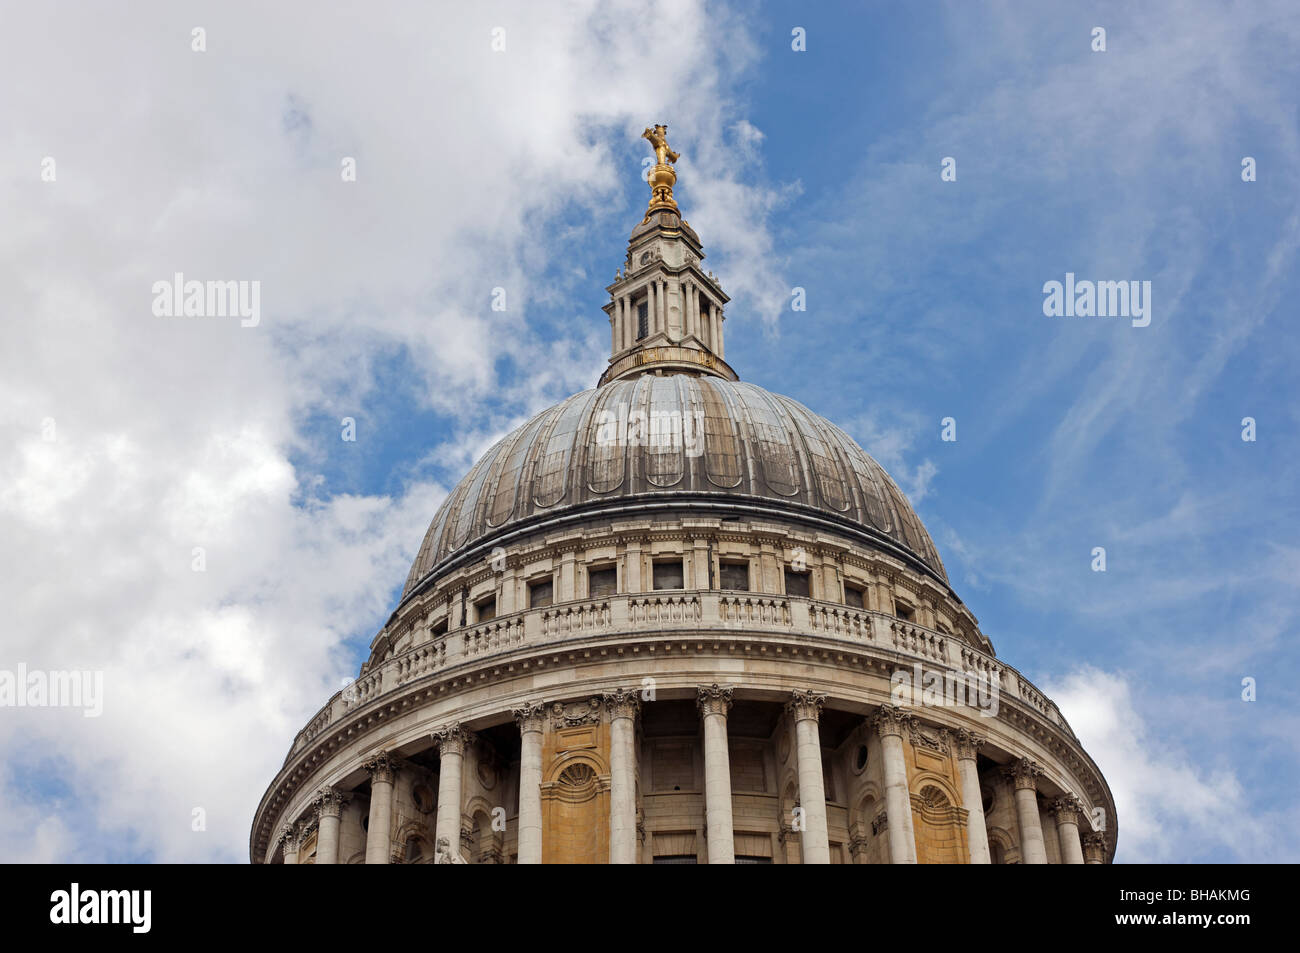 Dome of St. Paul's cathedral, London, UK. Stock Photo